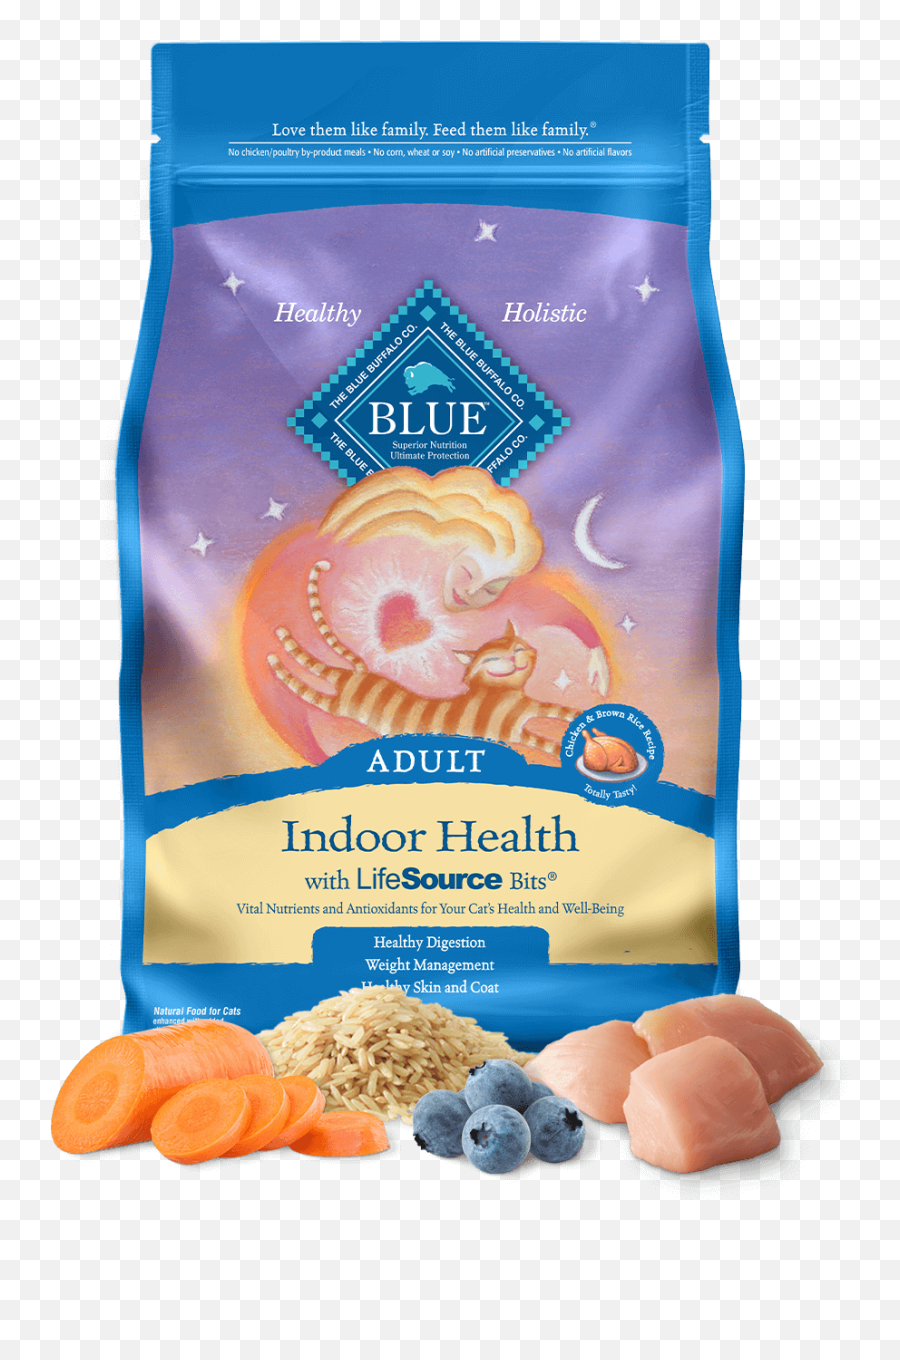 Blue Indoor Health Dry Cat Food Chicken U0026 Brown Rice Recipe - Blue Buffalo Indoor Cat Food Emoji,4 Different Cats With 4 Different Emotions